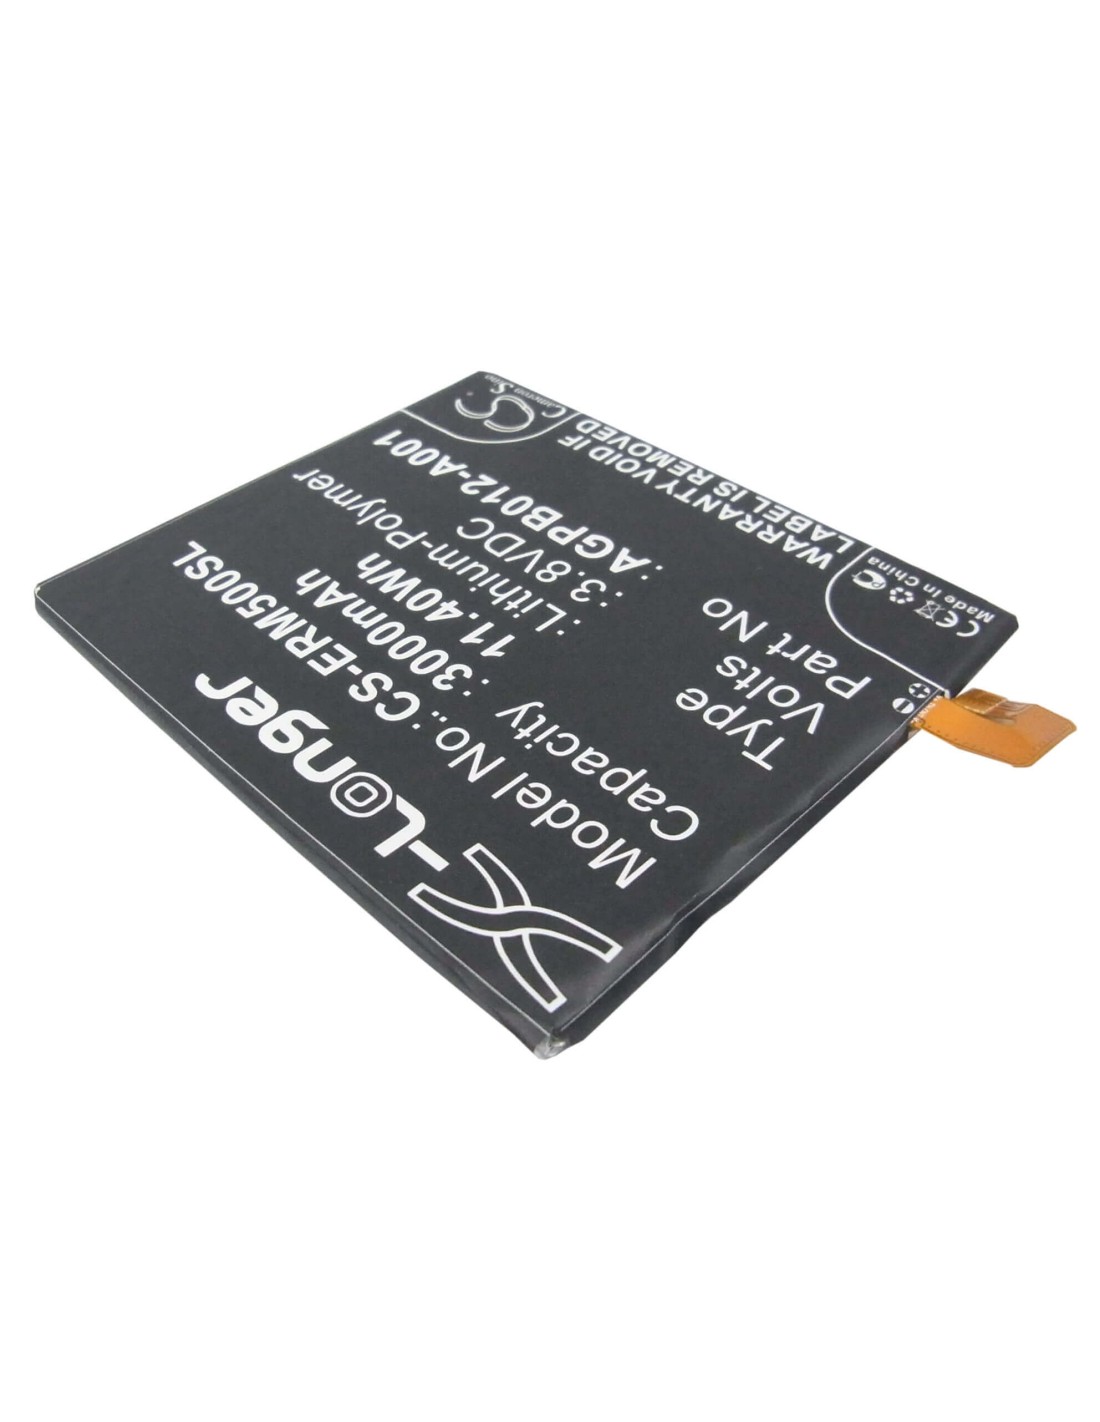 Battery for Sony Ericsson Xperia T2 Ultra D5303 LTE, Tianchi, Xperia T2 Ultra D5303 3.8V, 3000mAh - 11.40Wh